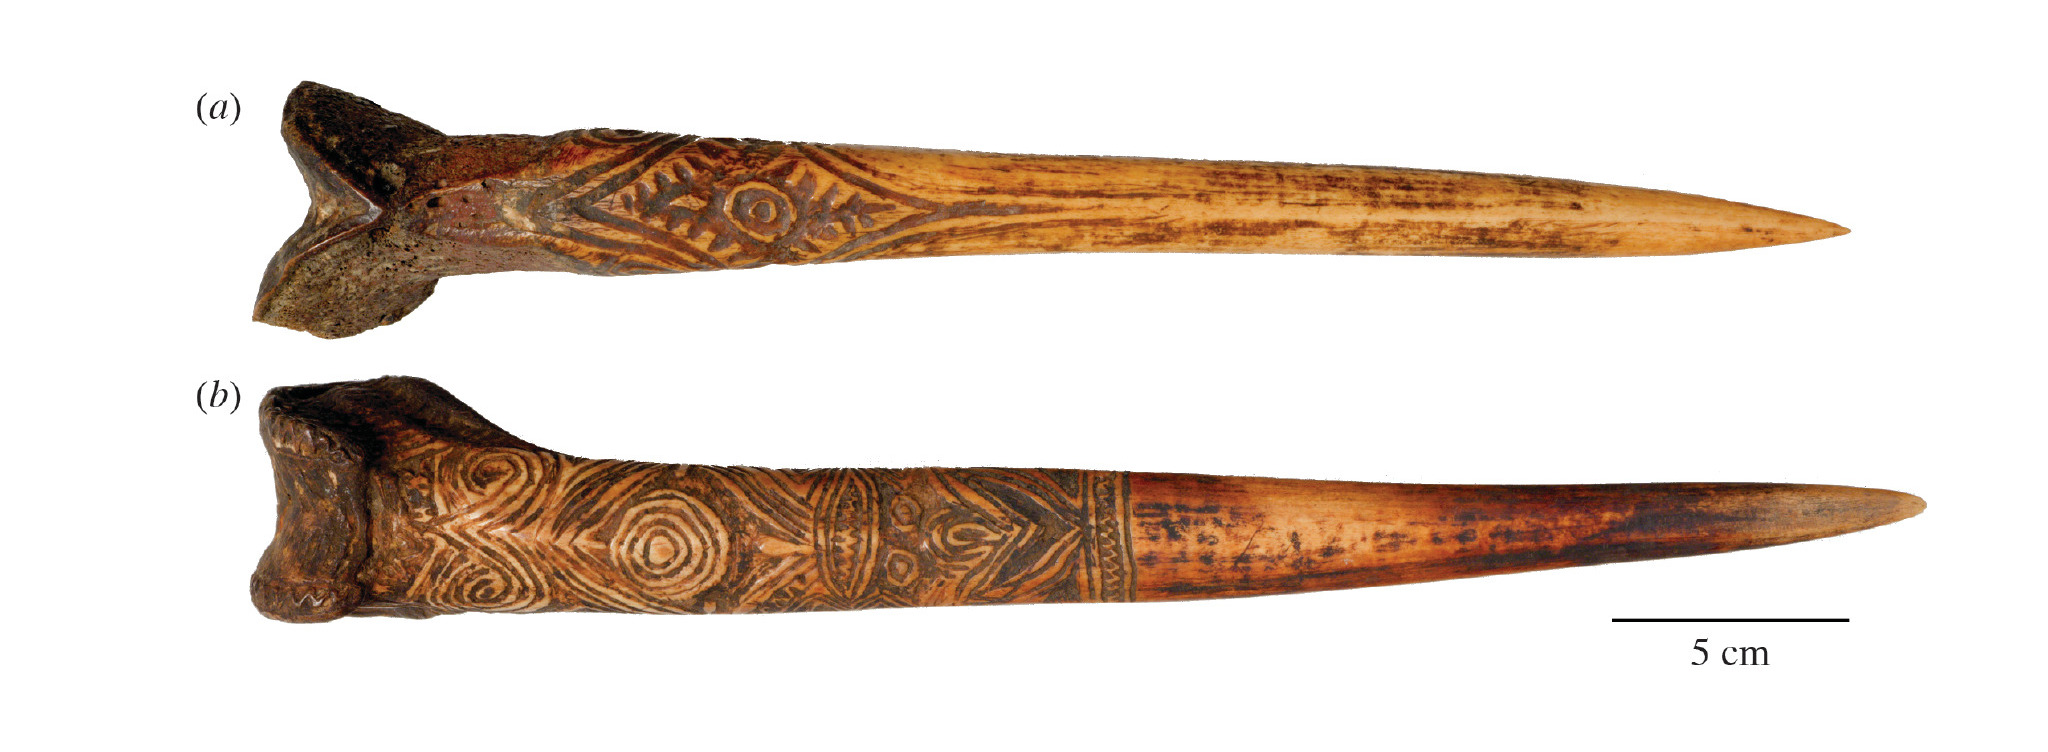 Why Papuan Men Made Daggers From Human Thigh Bones